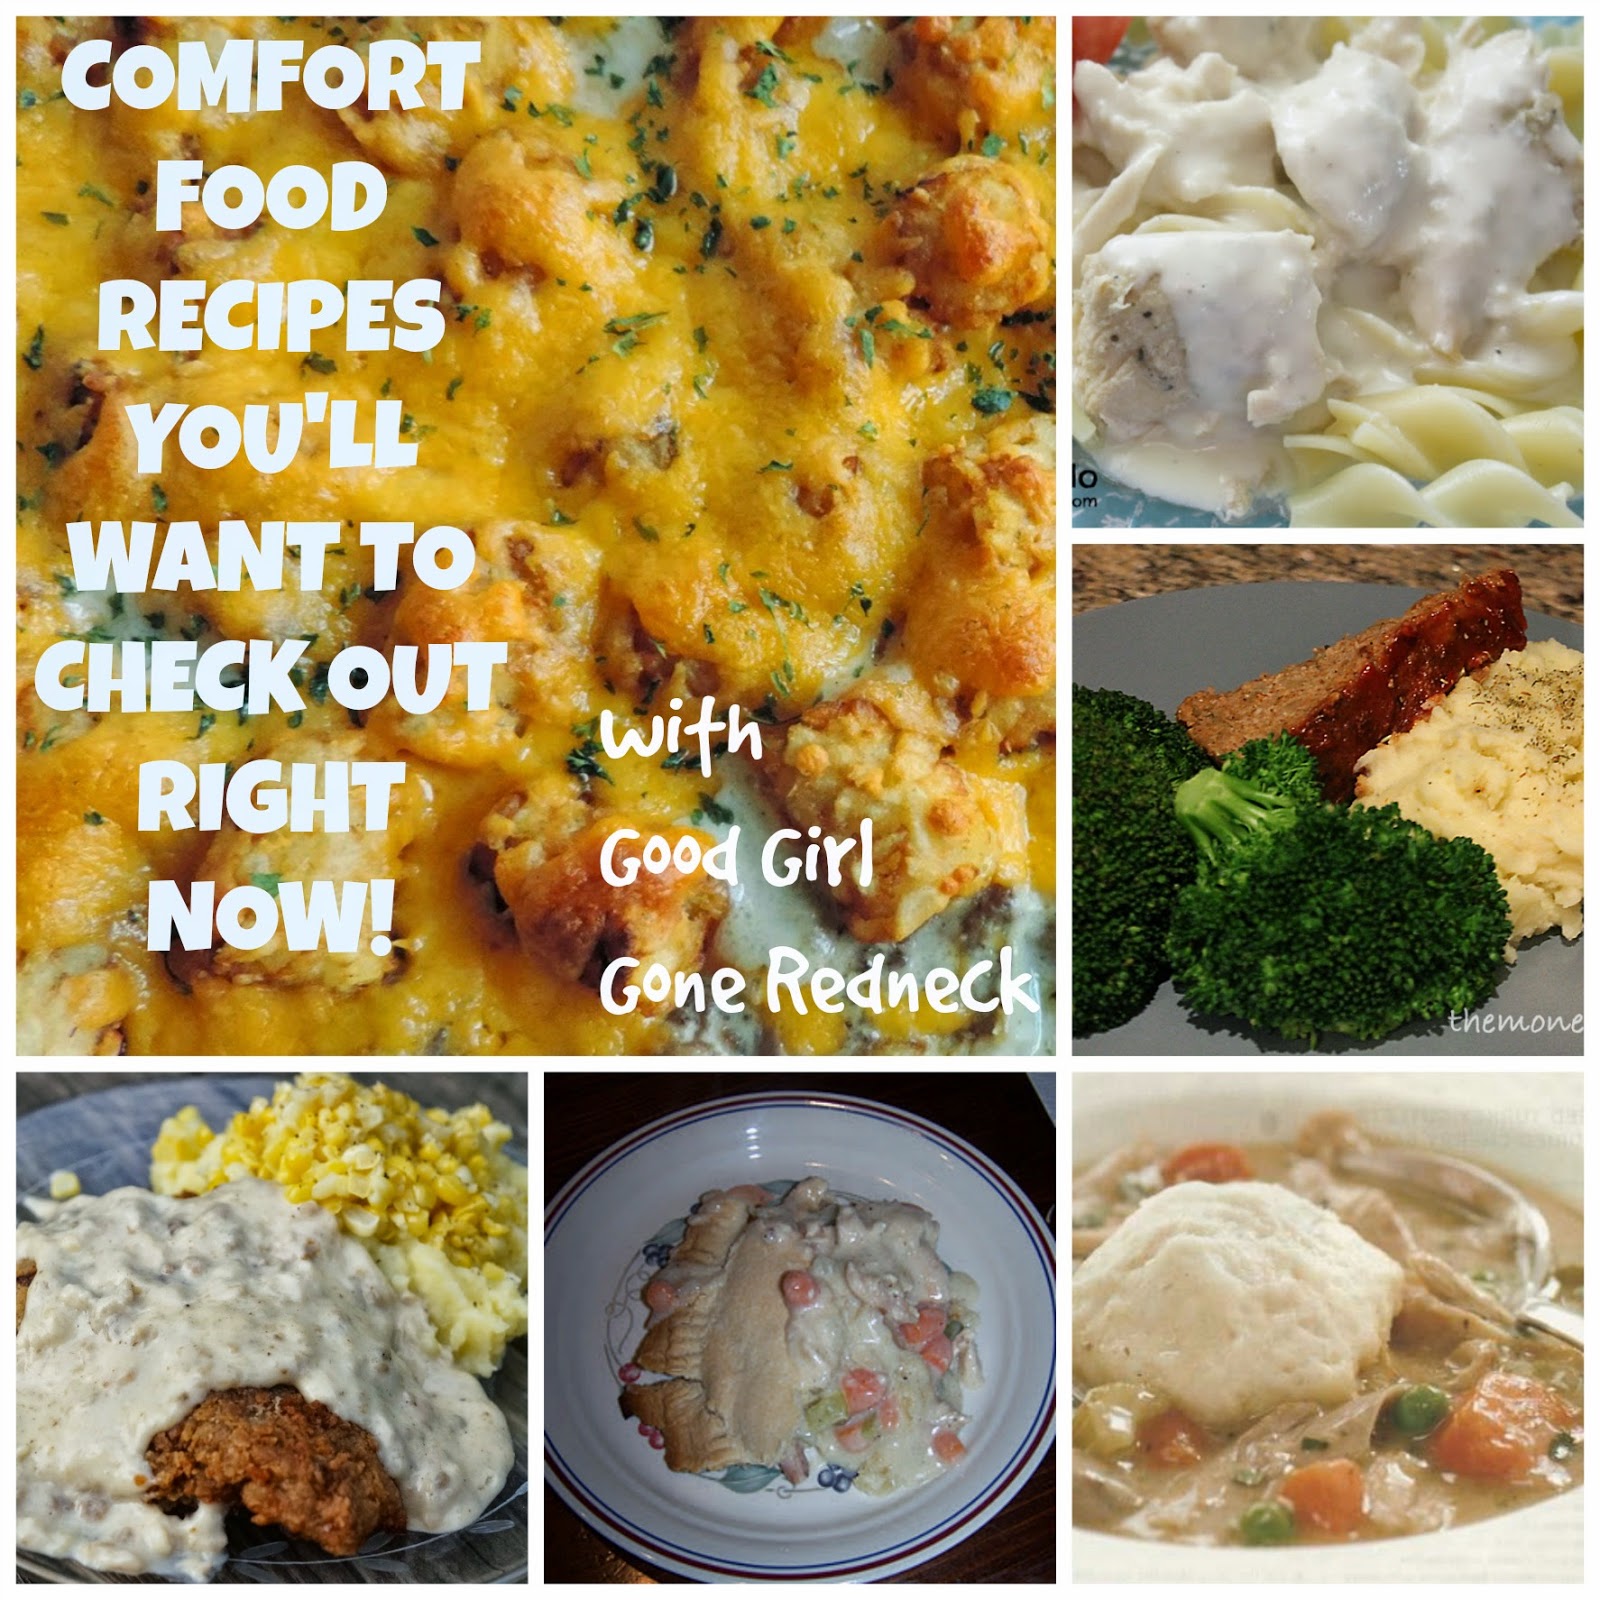 recipes, dinner, comfort, food, delicious, warming, comforting